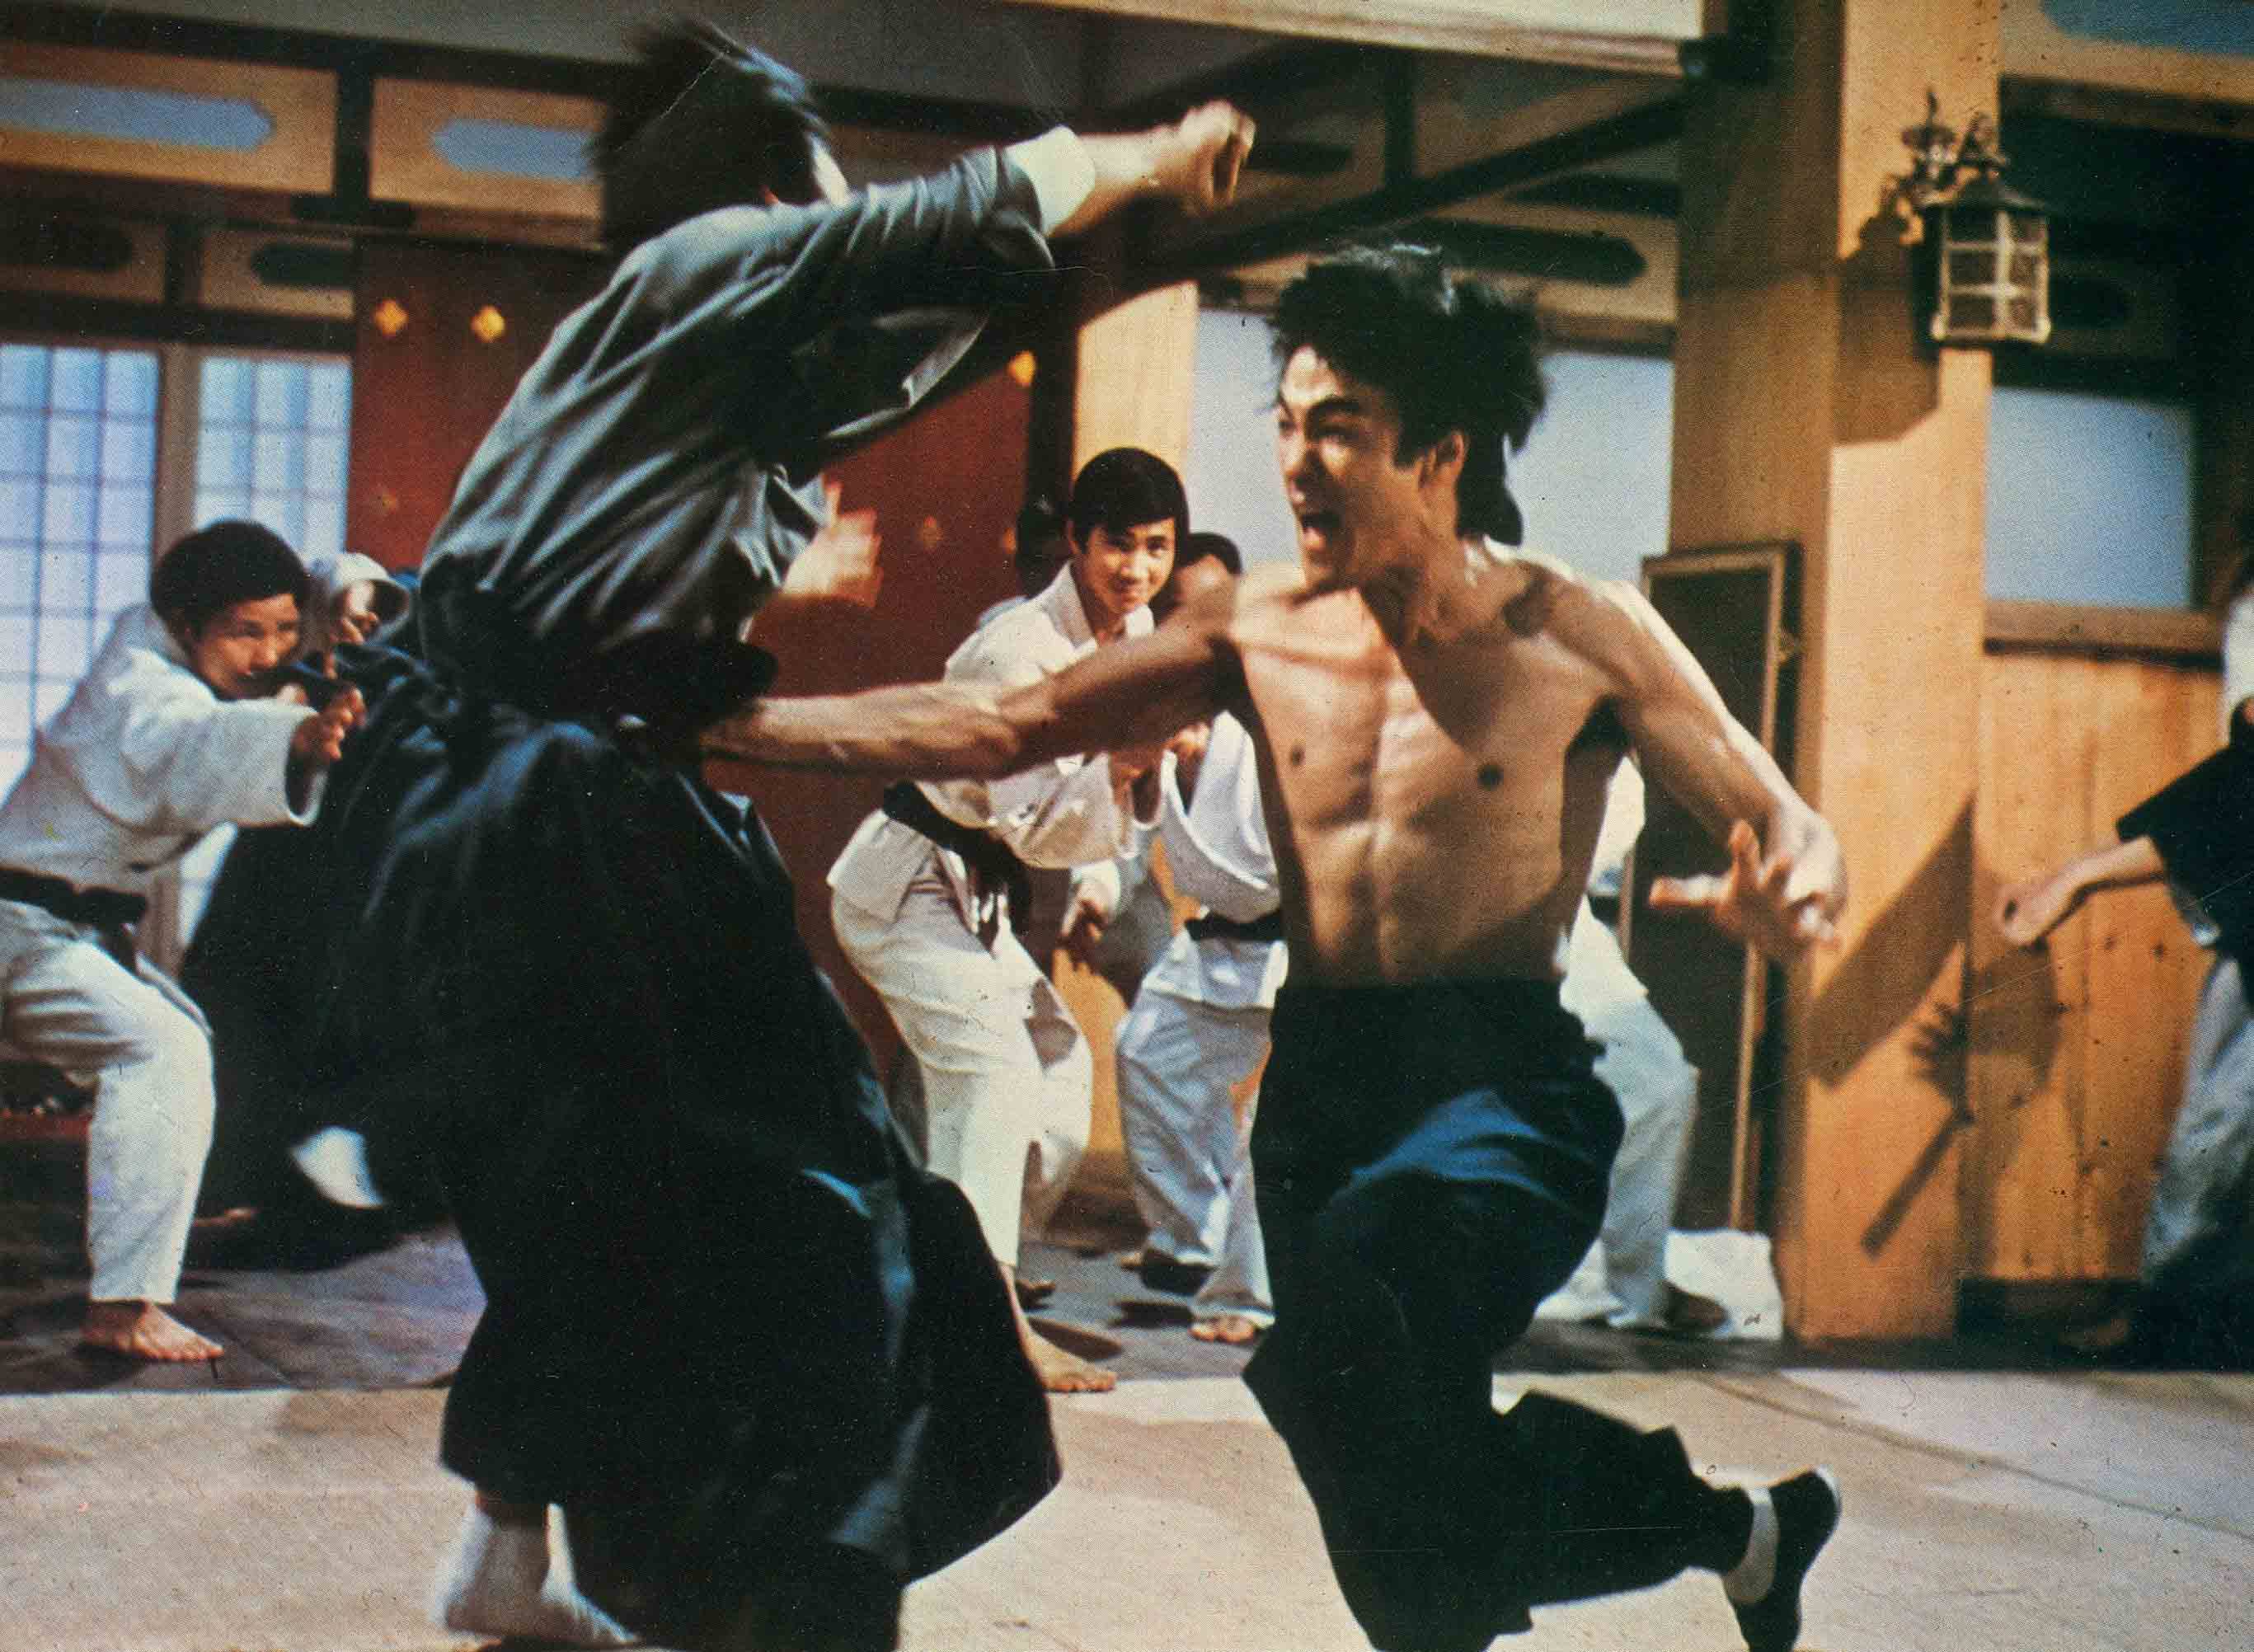 Bruce Lee in Fist of Fury (1972).